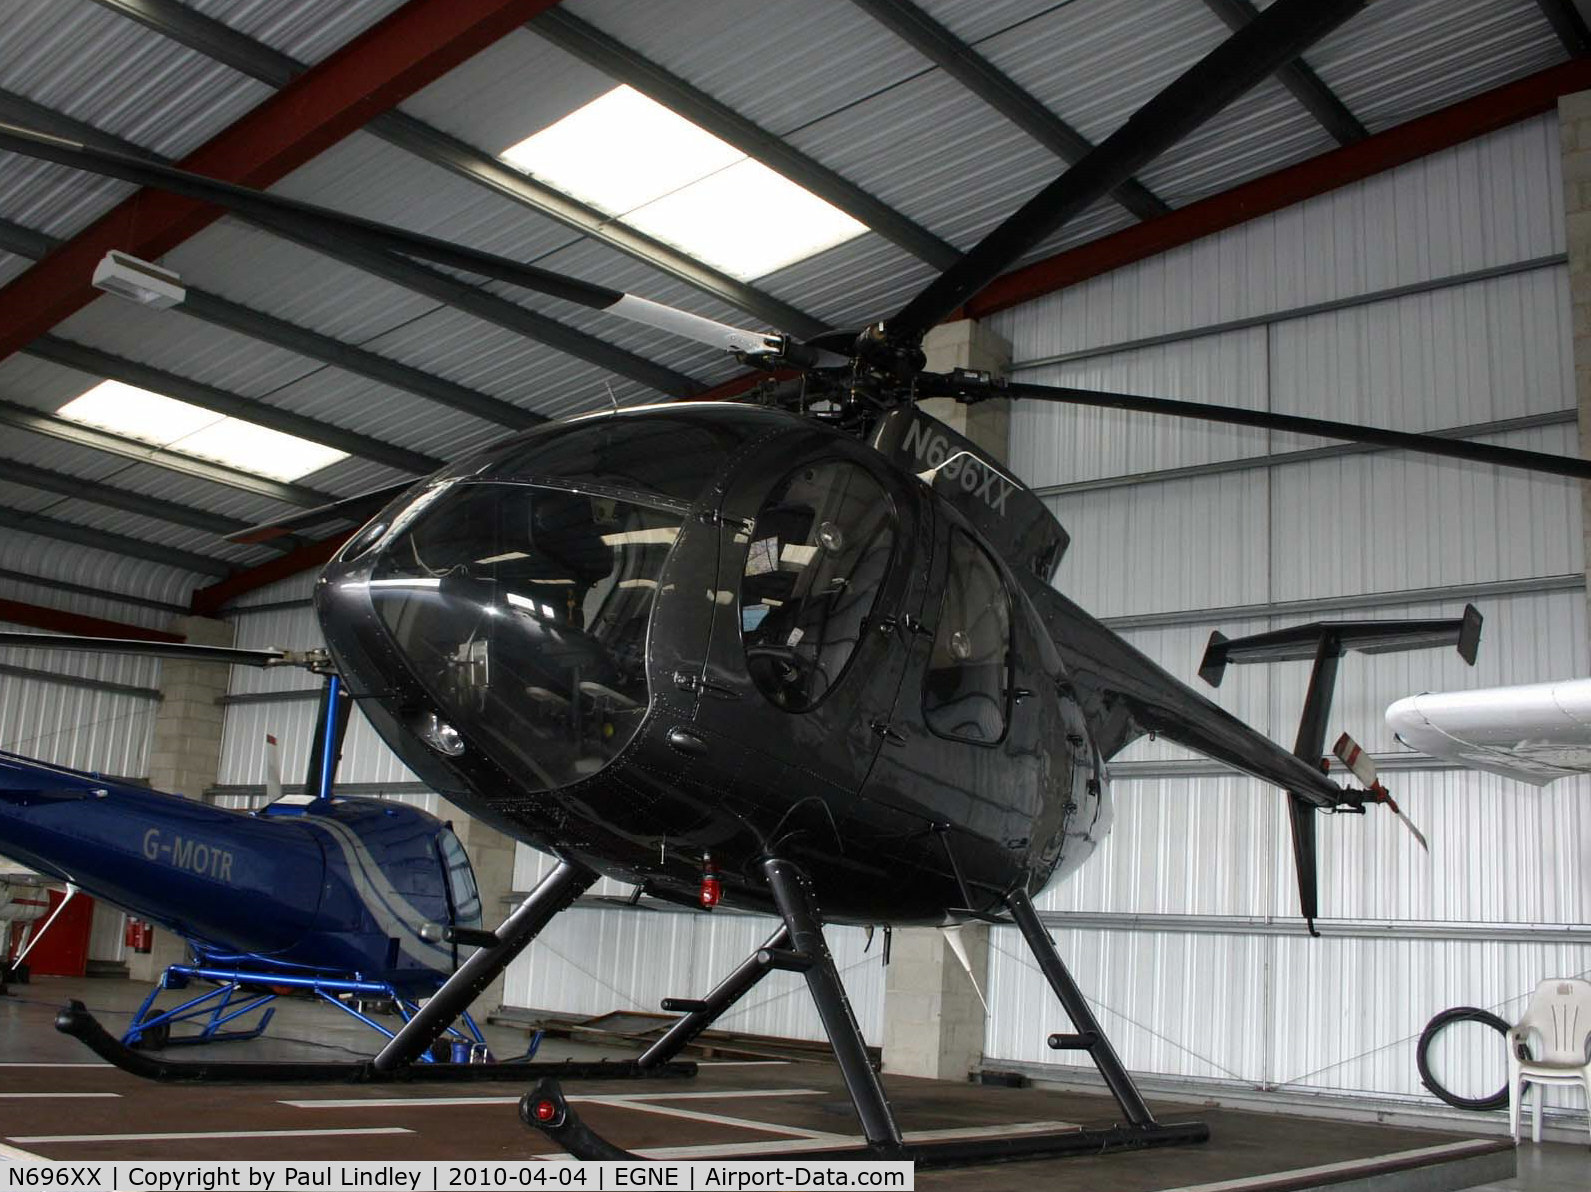 N696XX, 1999 MD Helicopters 369E C/N 0544E, under cover